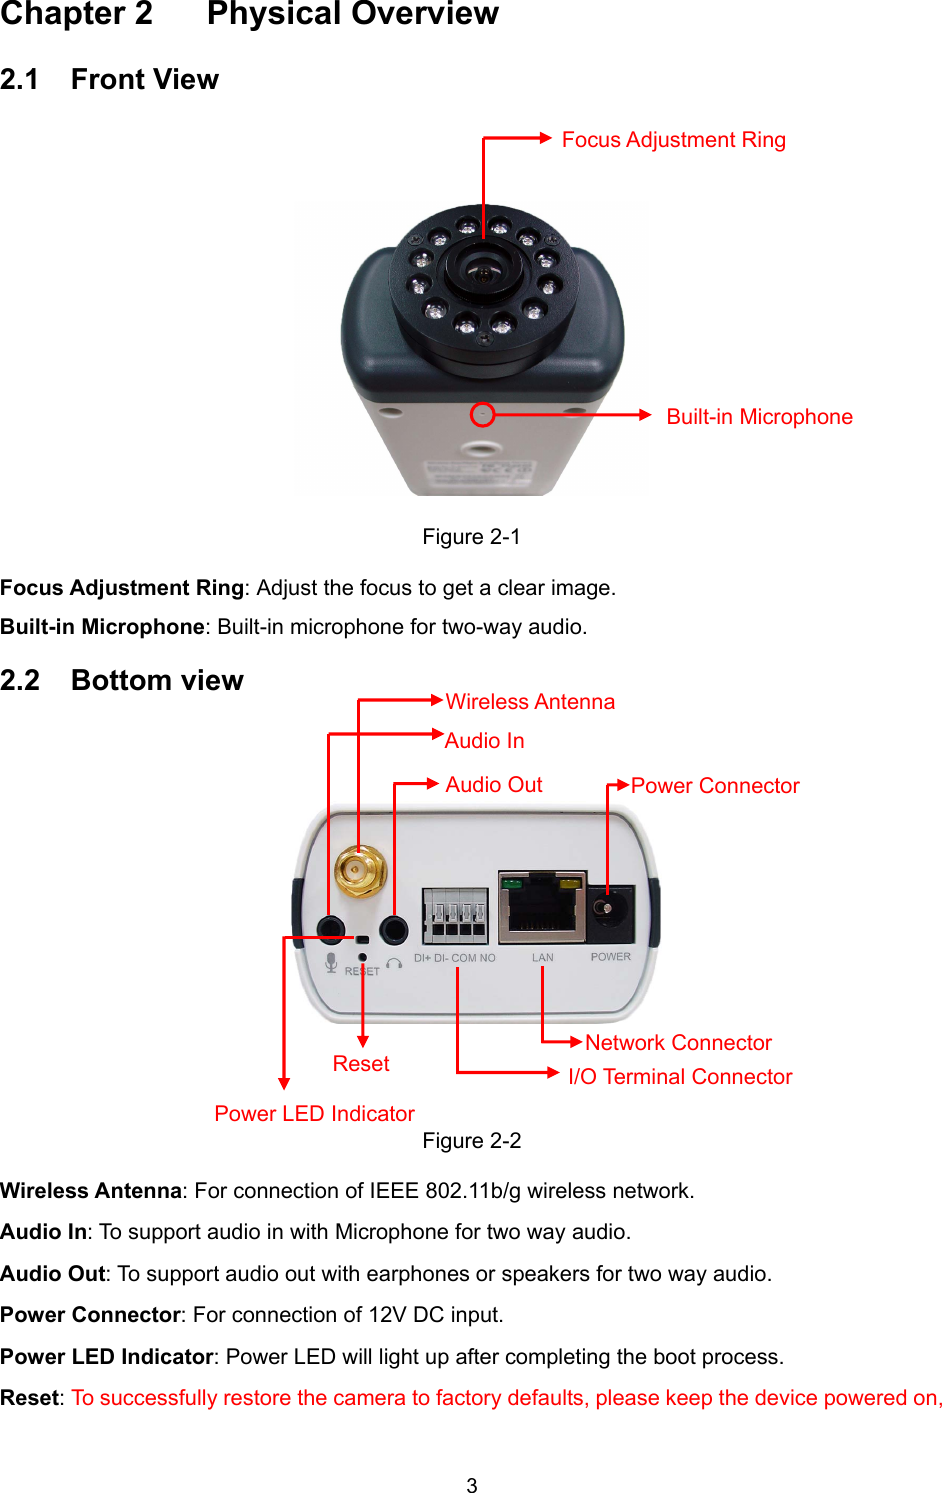 3 Chapter 2  Physical Overview 2.1  Front View  Figure 2-1 Focus Adjustment Ring: Adjust the focus to get a clear image. Built-in Microphone: Built-in microphone for two-way audio.   2.2  Bottom view  Figure 2-2 Wireless Antenna: For connection of IEEE 802.11b/g wireless network. Audio In: To support audio in with Microphone for two way audio. Audio Out: To support audio out with earphones or speakers for two way audio. Power Connector: For connection of 12V DC input. Power LED Indicator: Power LED will light up after completing the boot process. Reset: To successfully restore the camera to factory defaults, please keep the device powered on, Focus Adjustment Ring Built-in Microphone Wireless AntennaAudio InAudio Out Power Connector Power LED IndicatorNetwork Connector Reset I/O Terminal Connector 